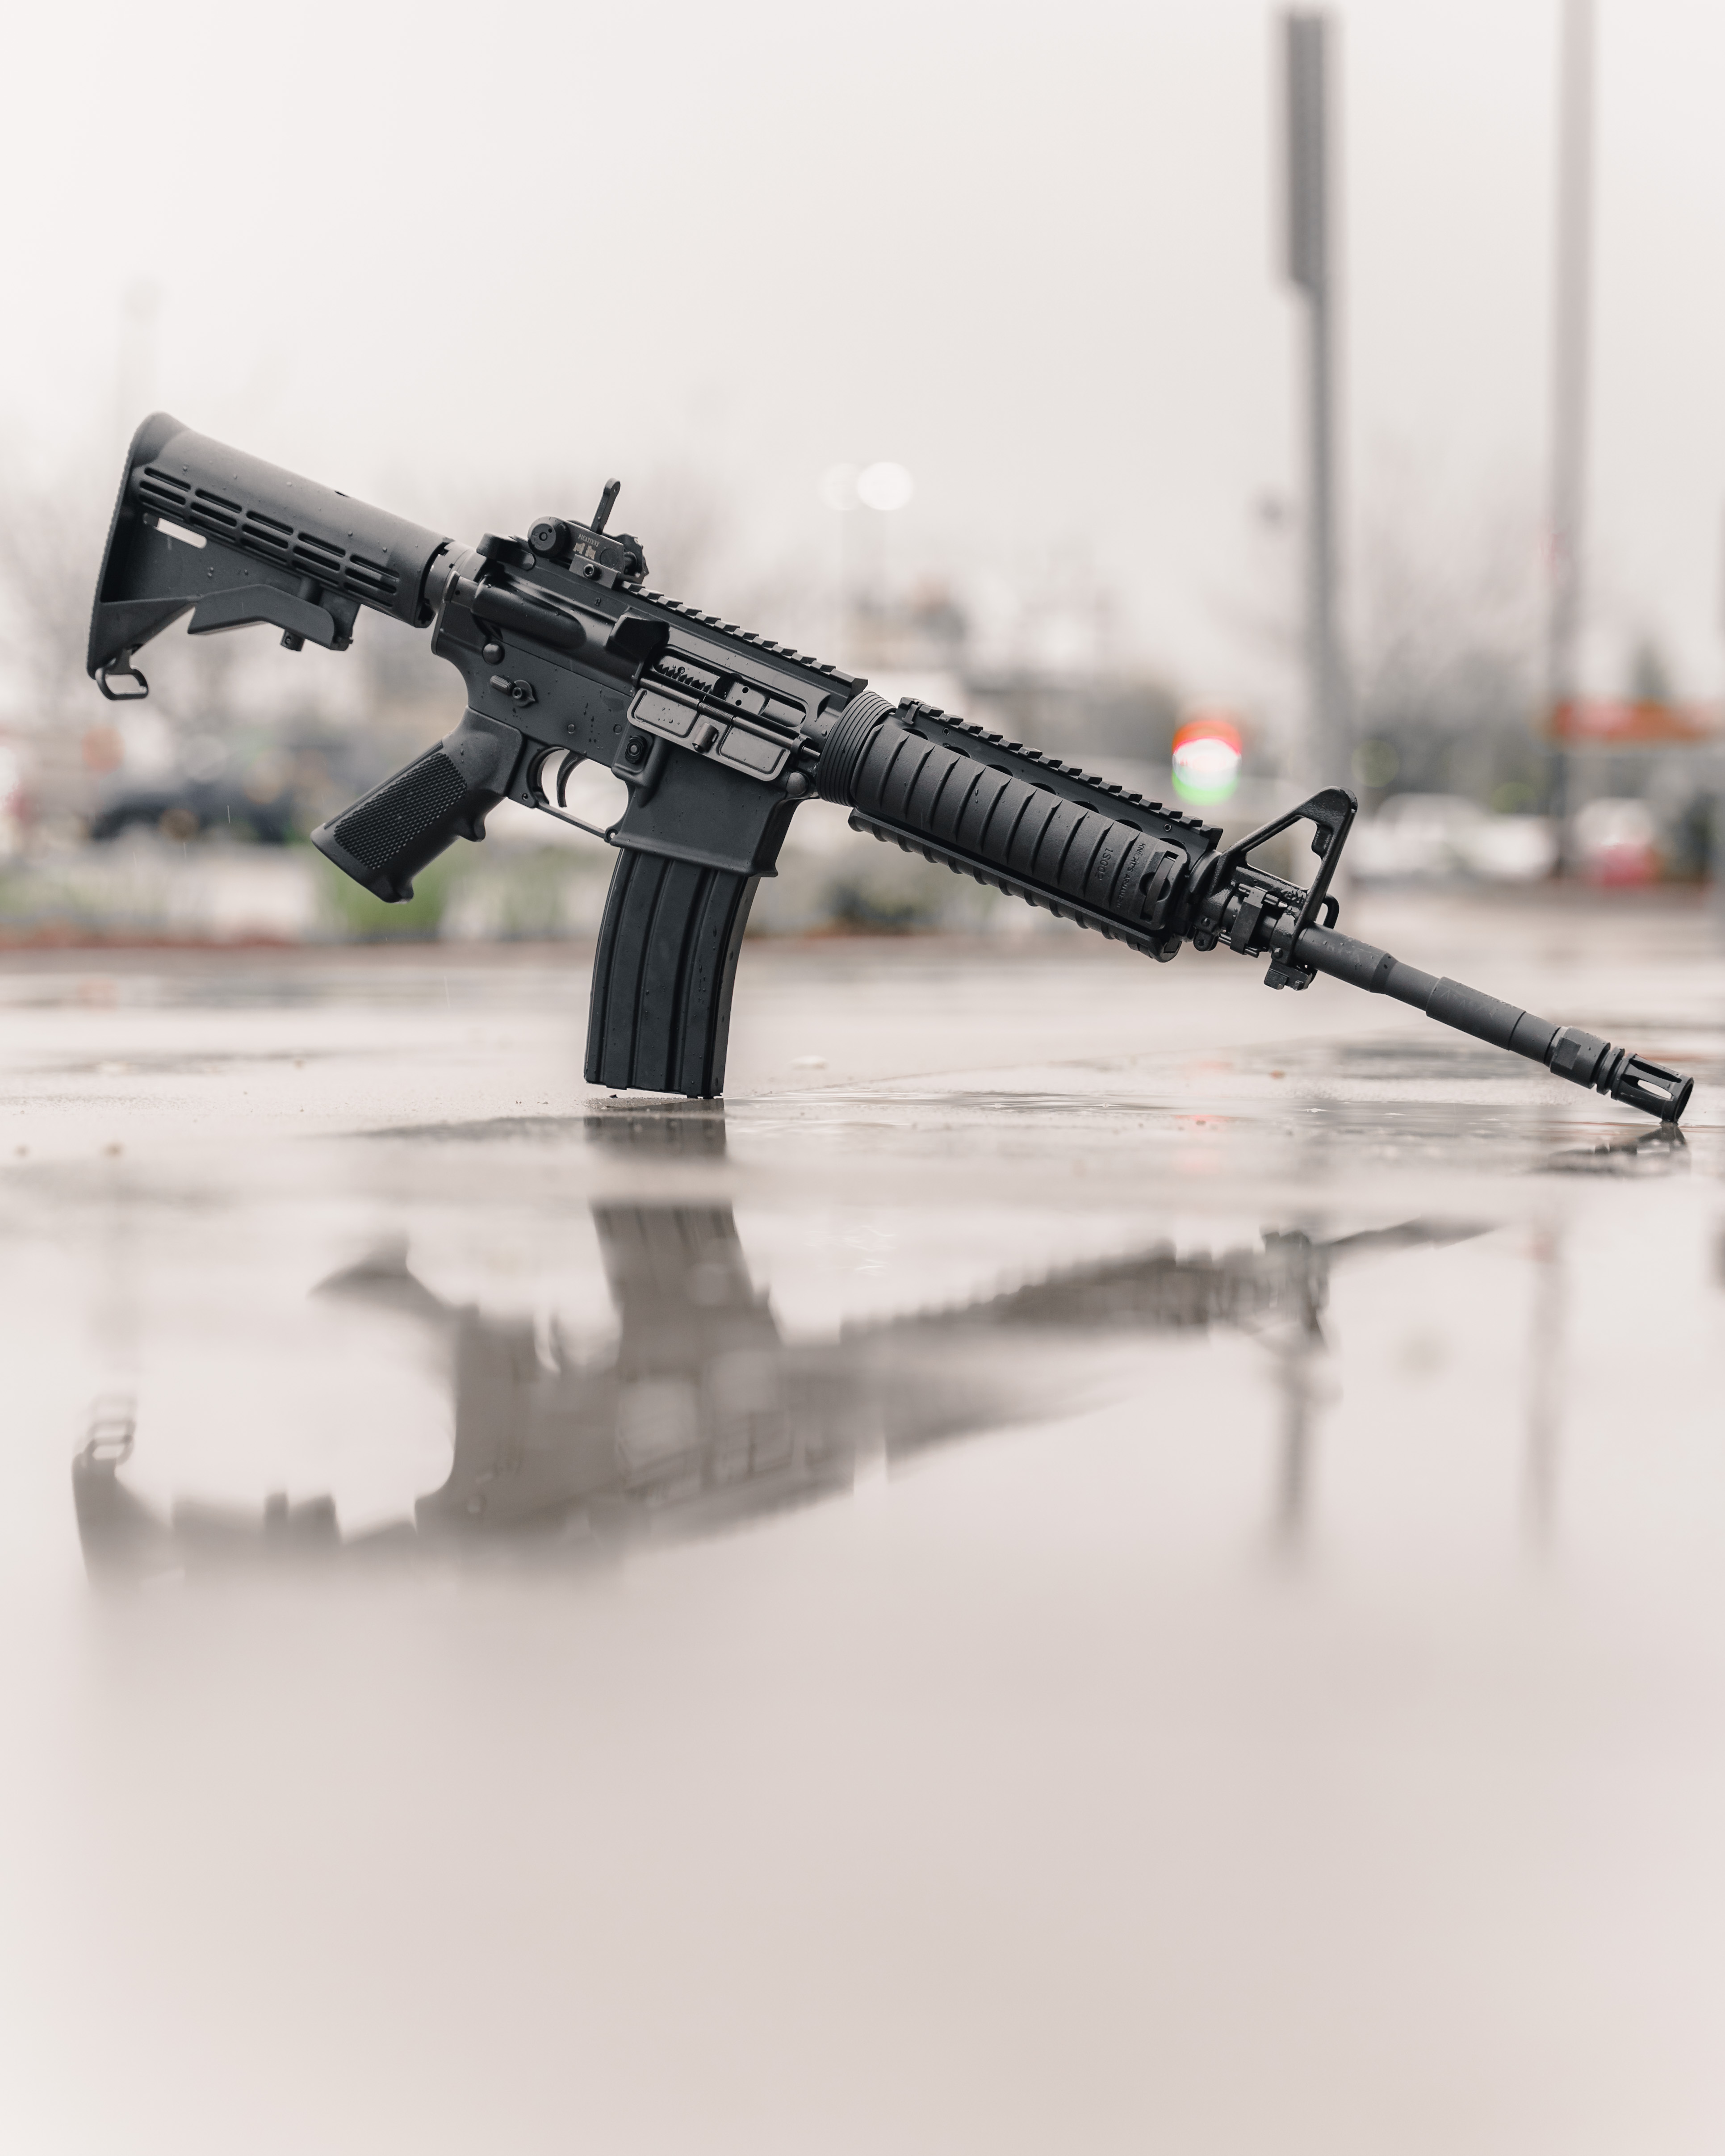 AR-15 picture by Boise Black Rifle